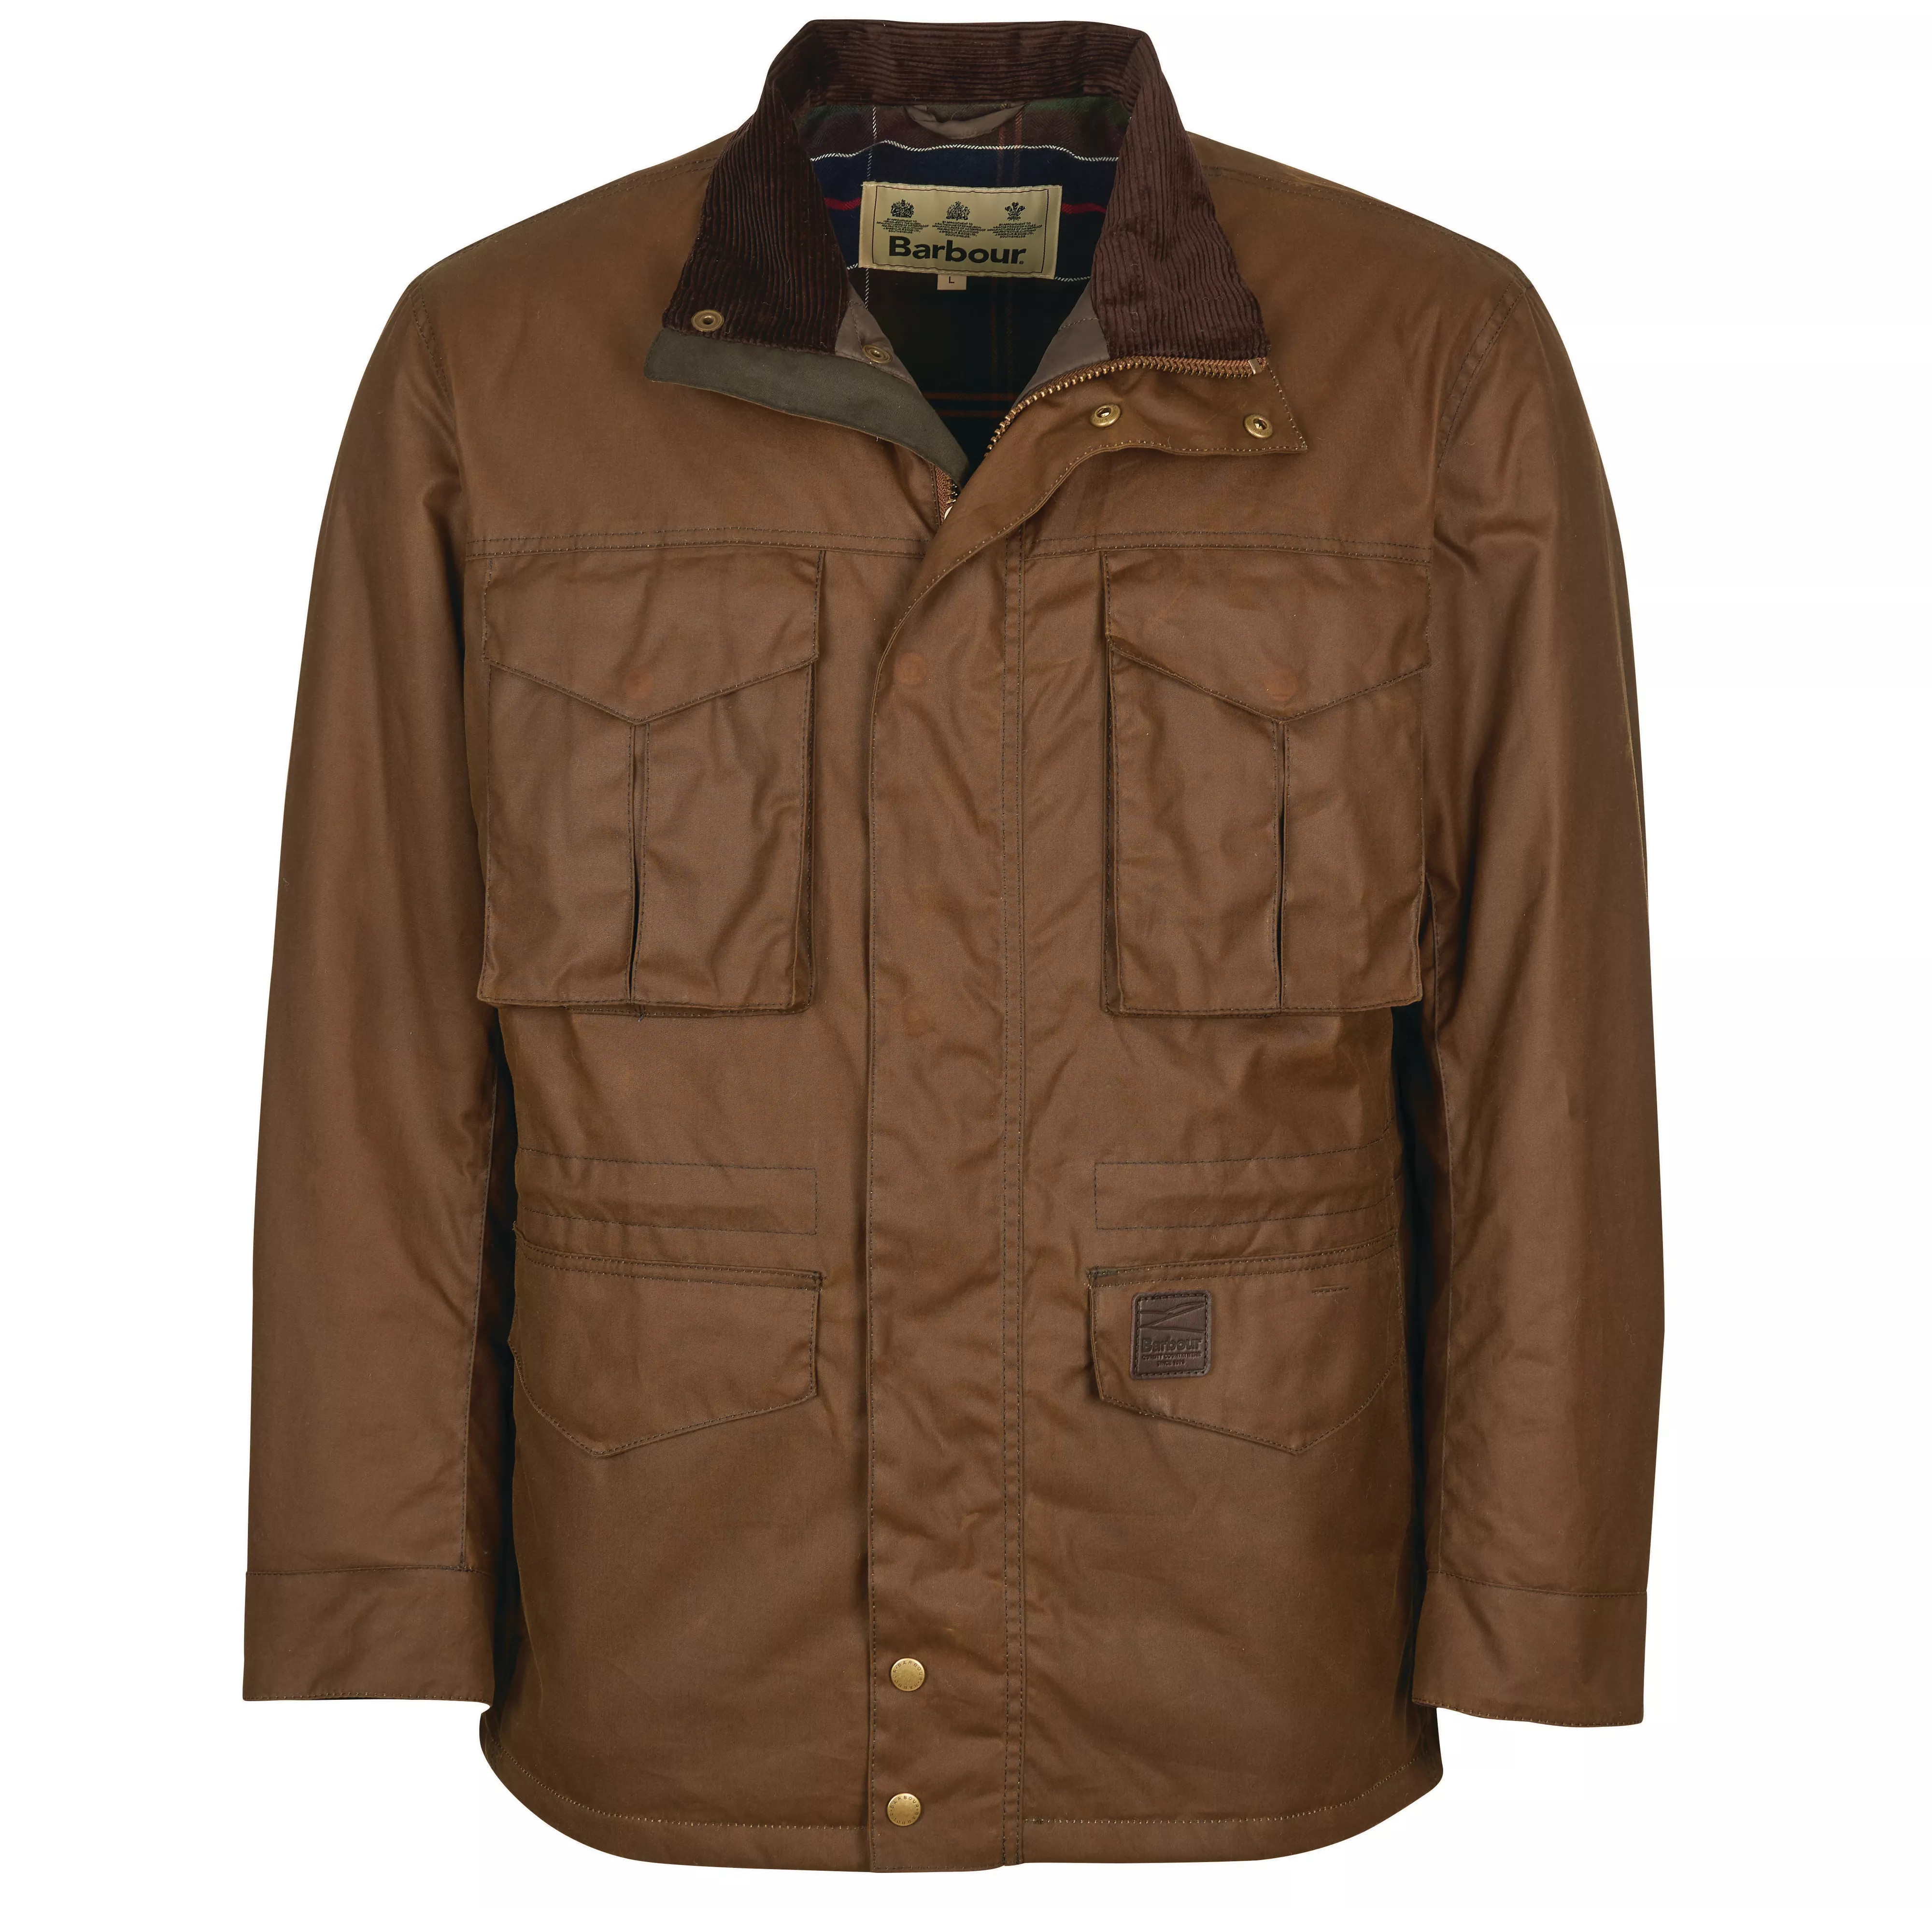 Watson Wax Jacket in Brown by Barbour - Hansen's Clothing